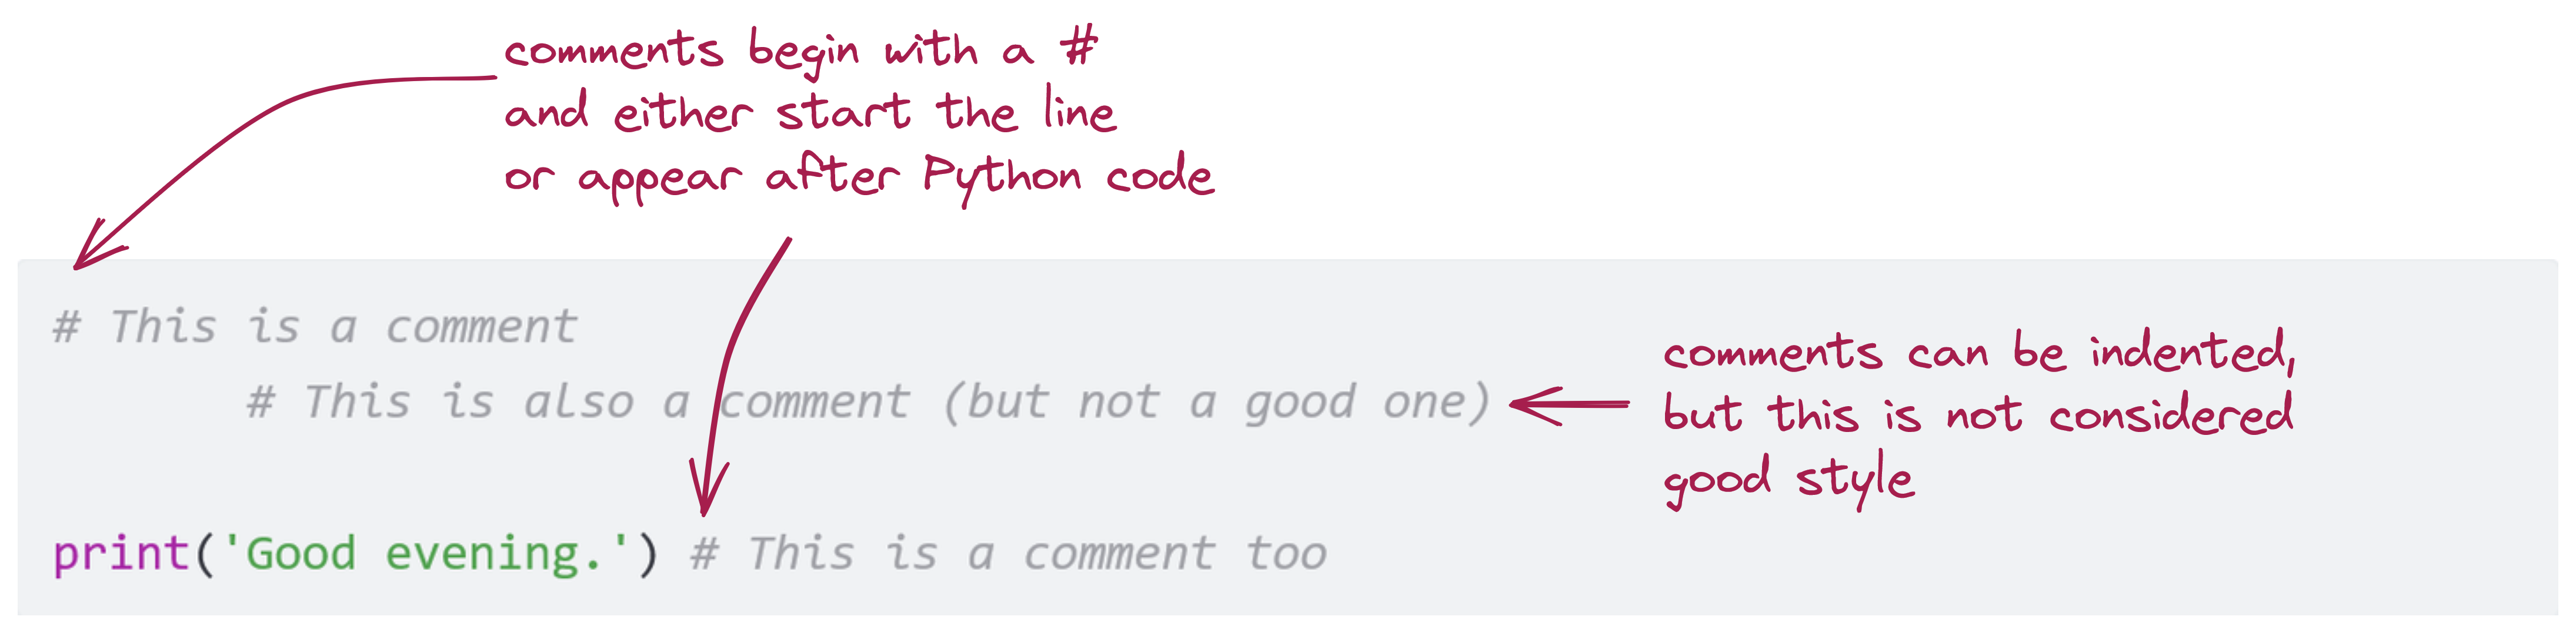 Illustrating features of comments